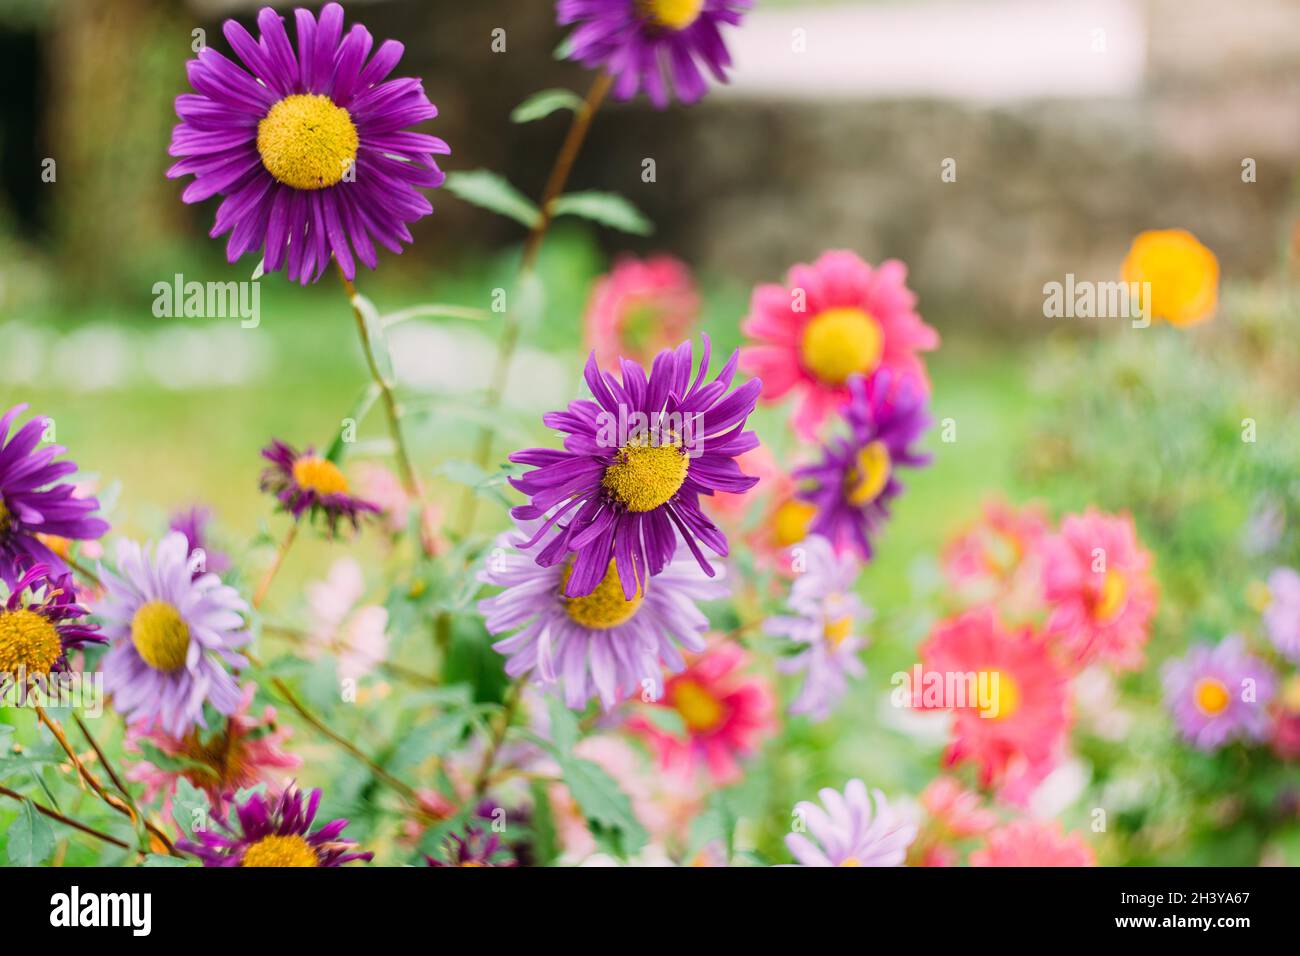 Chrysanthemums of purple color close-up - garden flowers in a flowerbed. Stock Photo